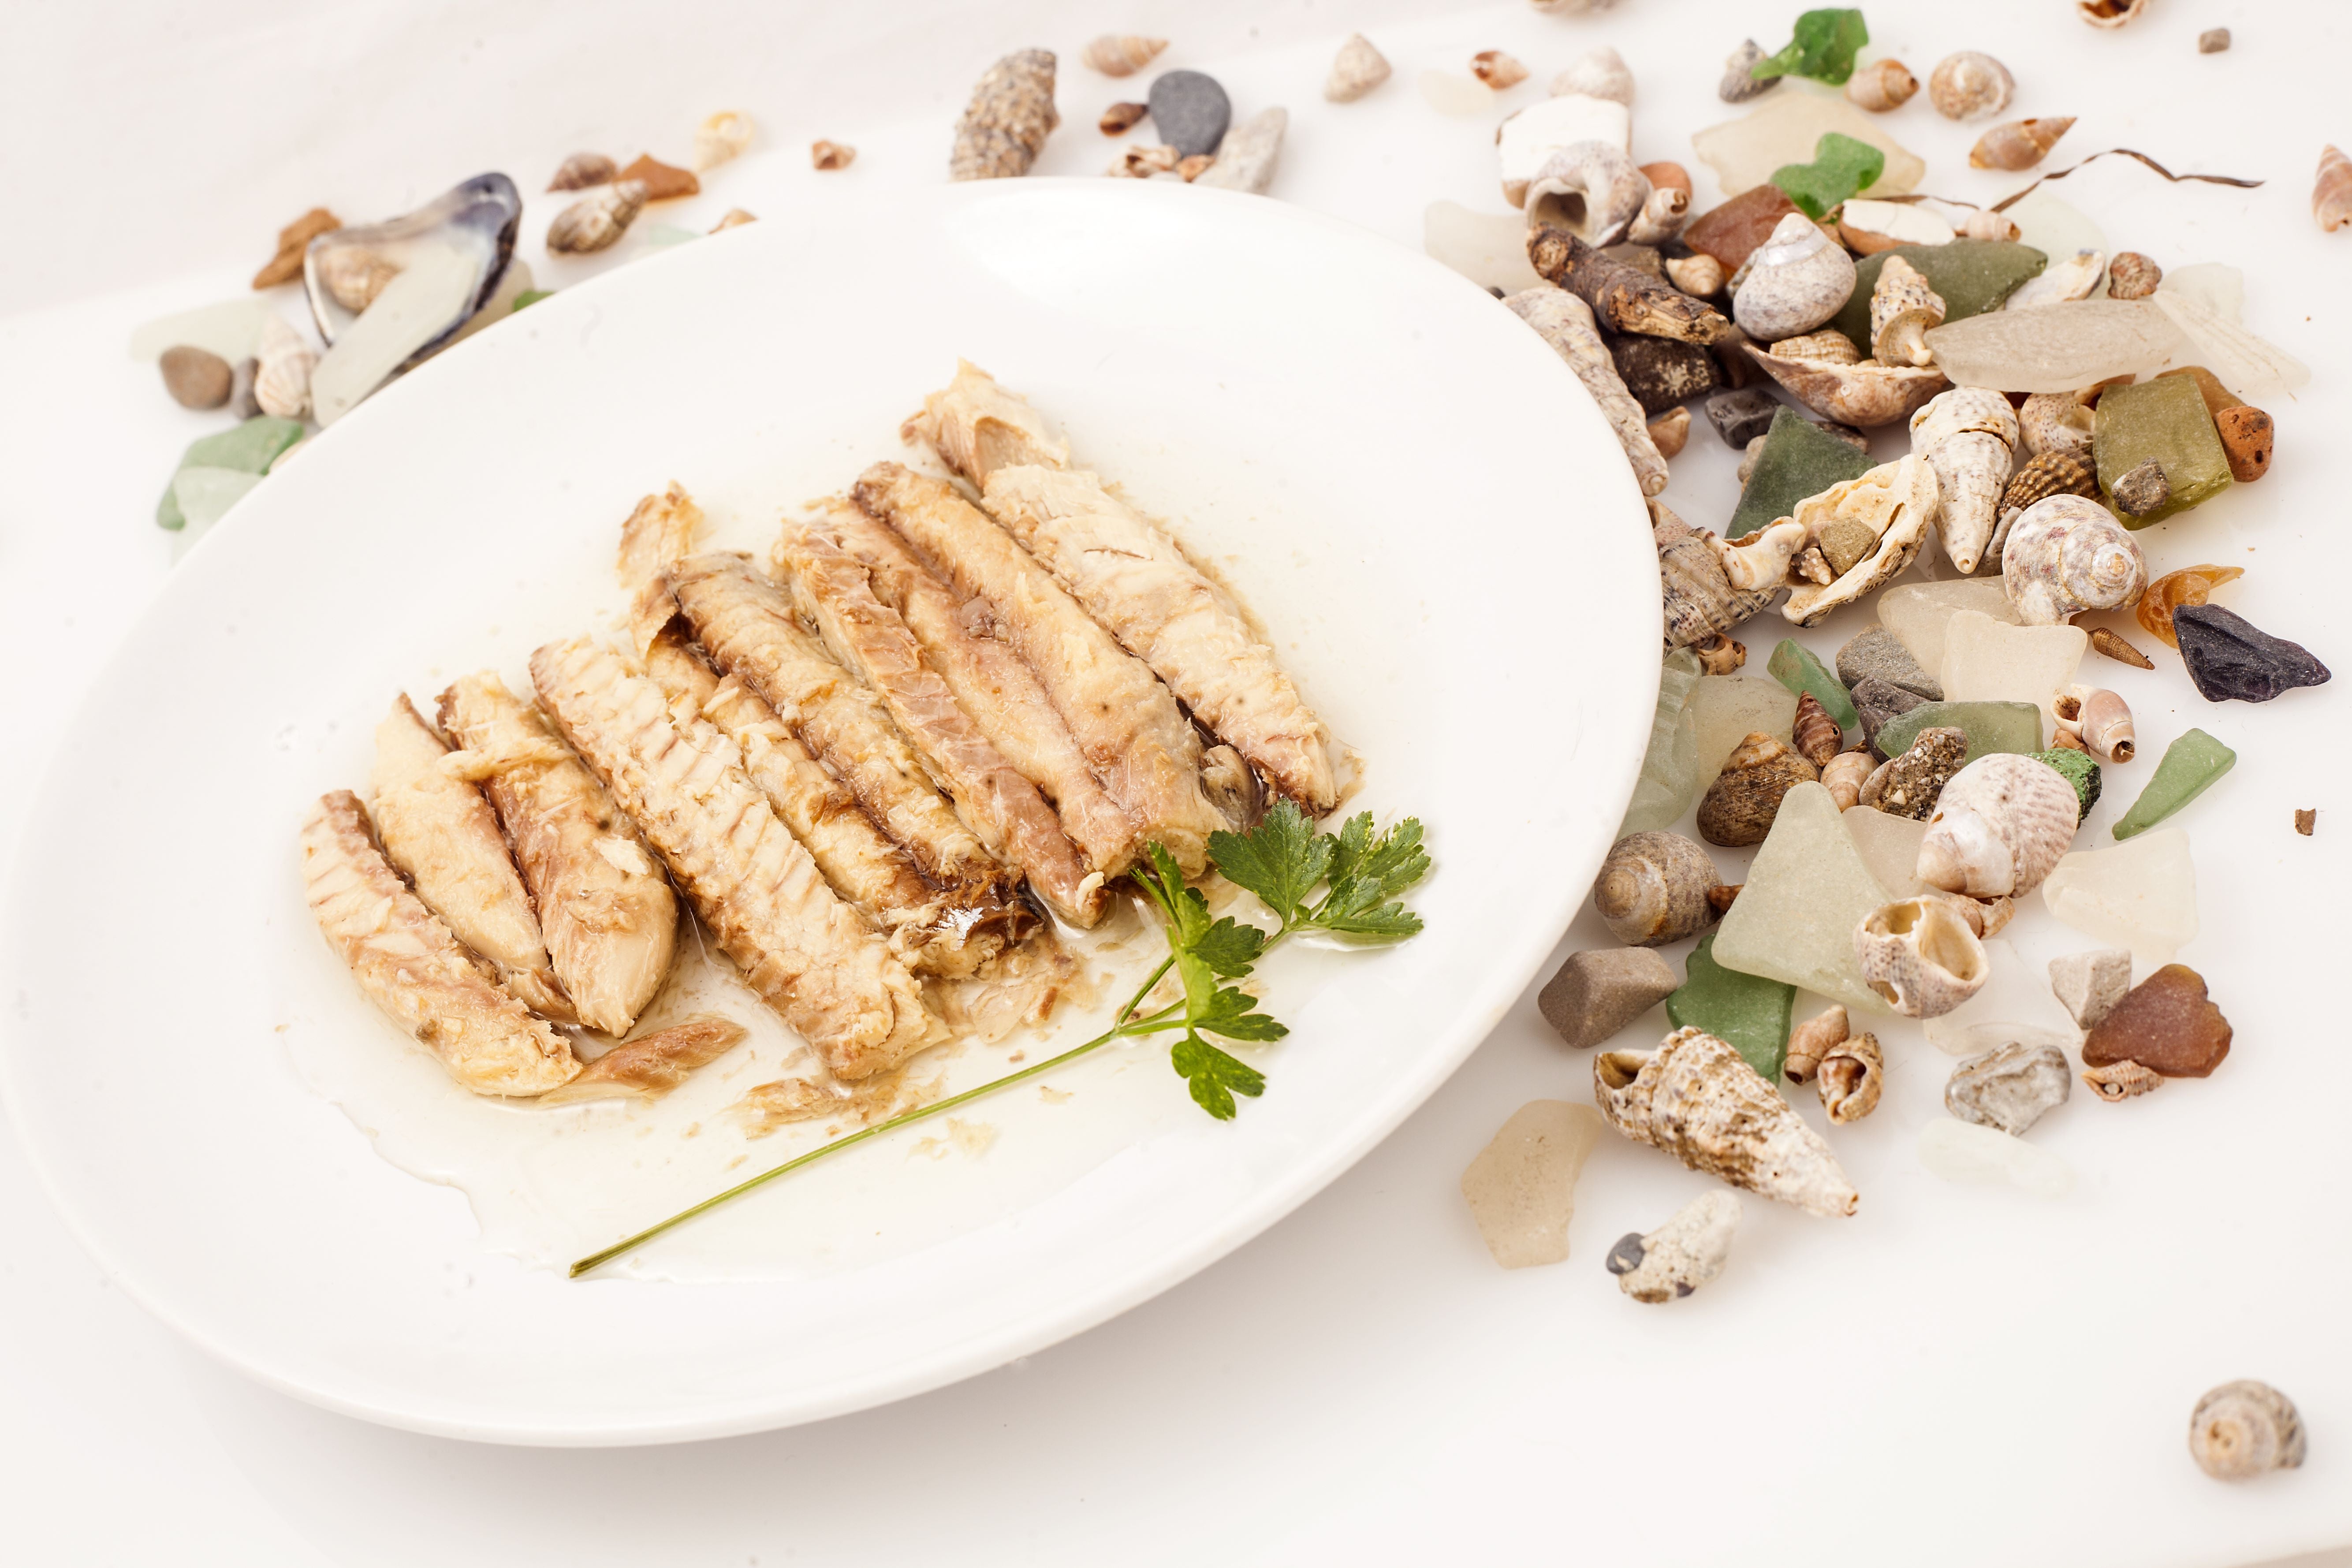 Mackarel filets in olive oil being served, decorated with seashells